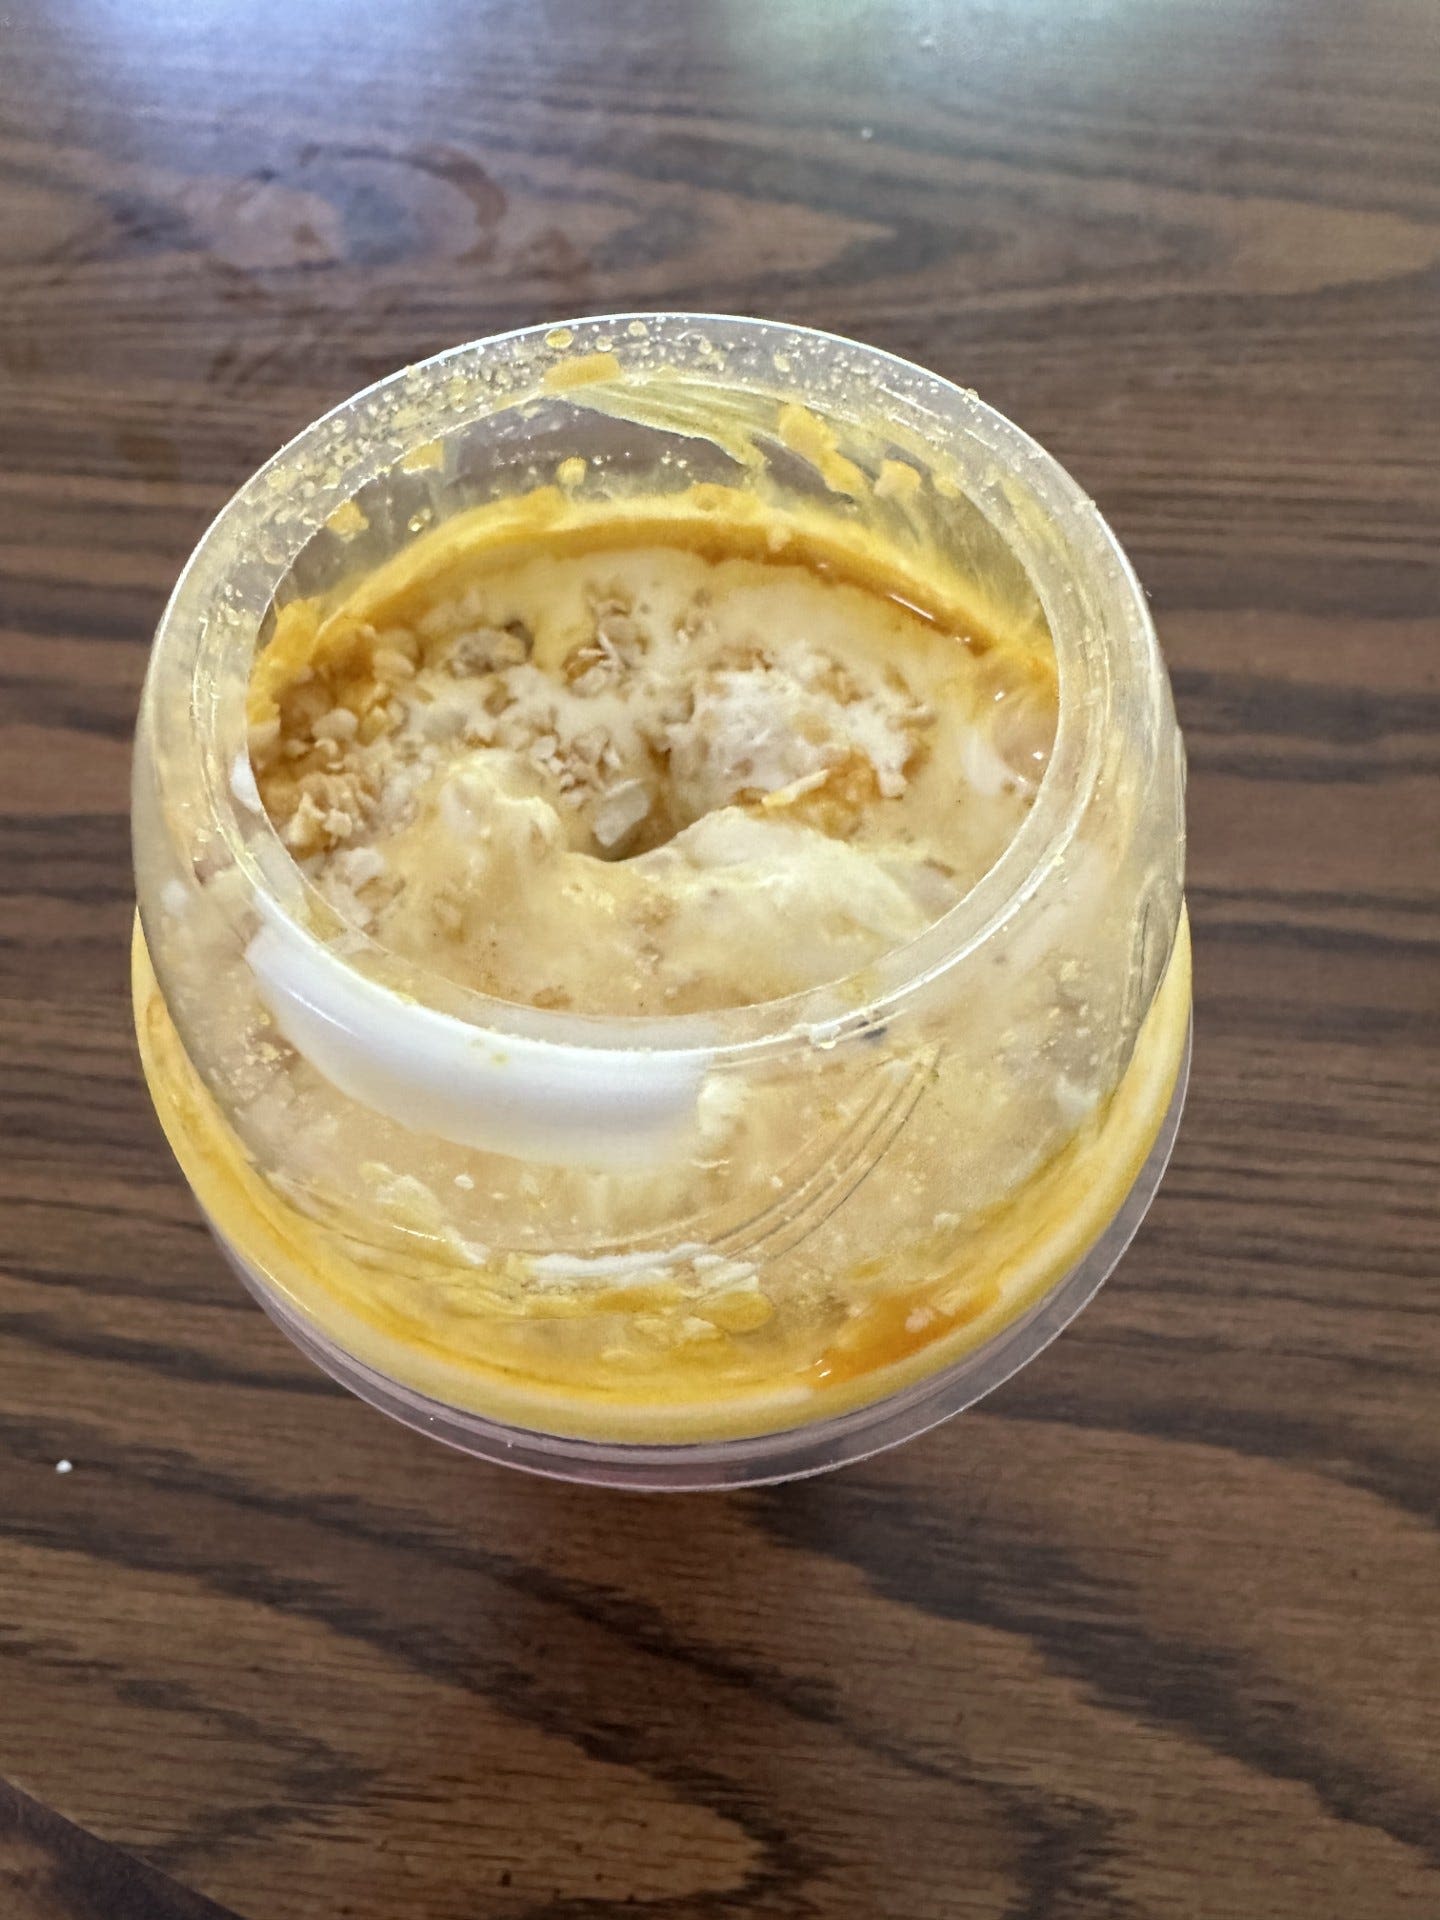 McDonald's Grandma McFlurry is available. Here's what it tastes like and where to get it